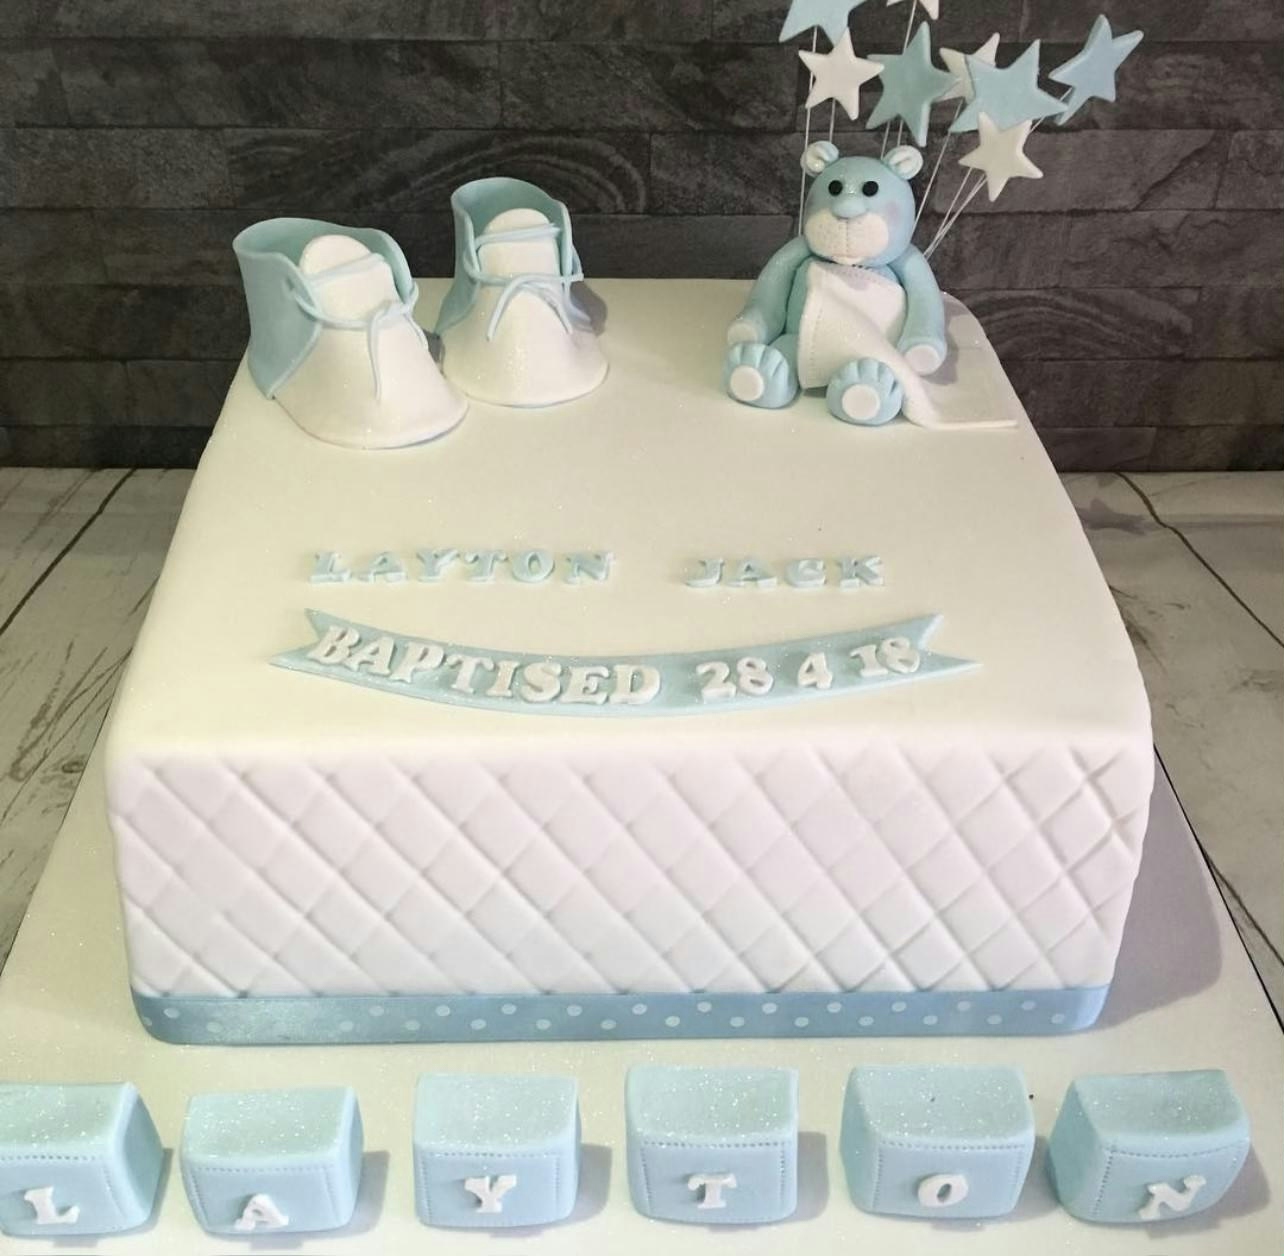 A white and light blue baptism cake with baby shoes